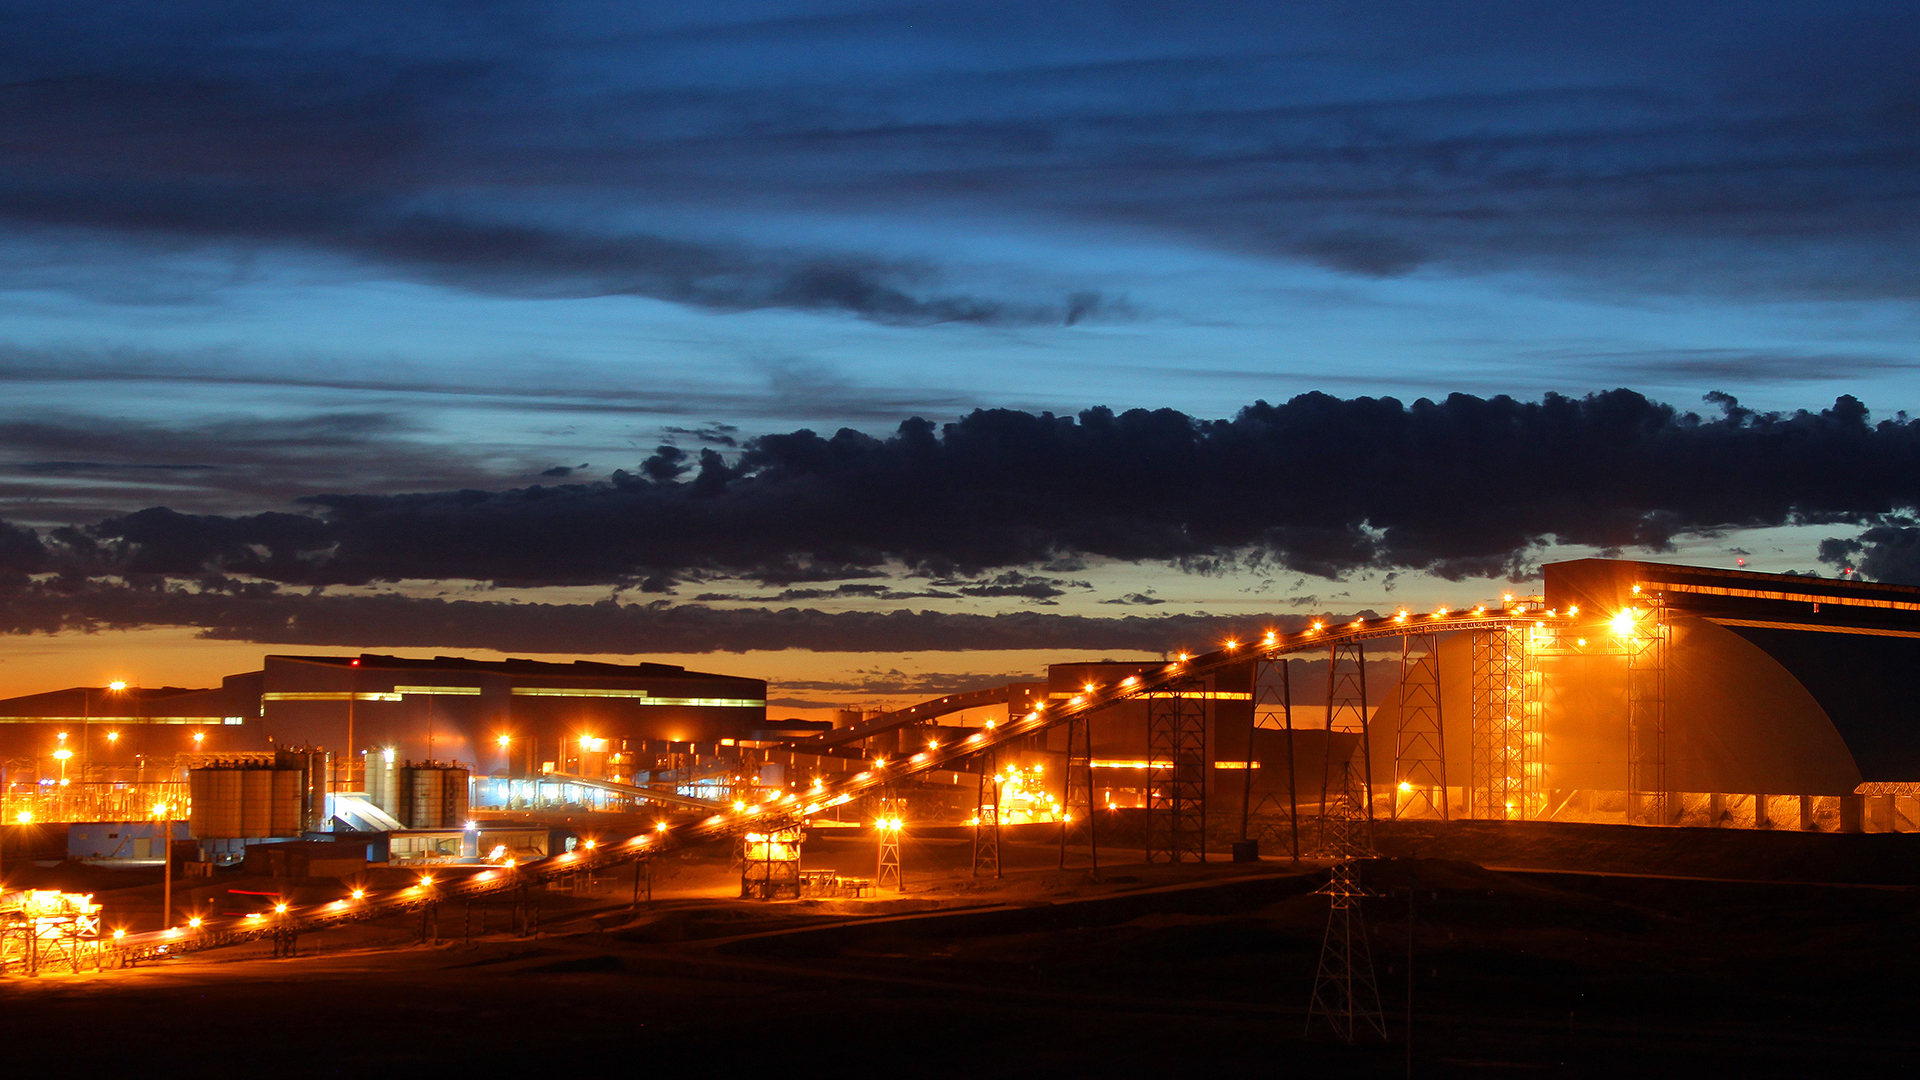 Oyu Tolgoi concentrator at night, Mongolia